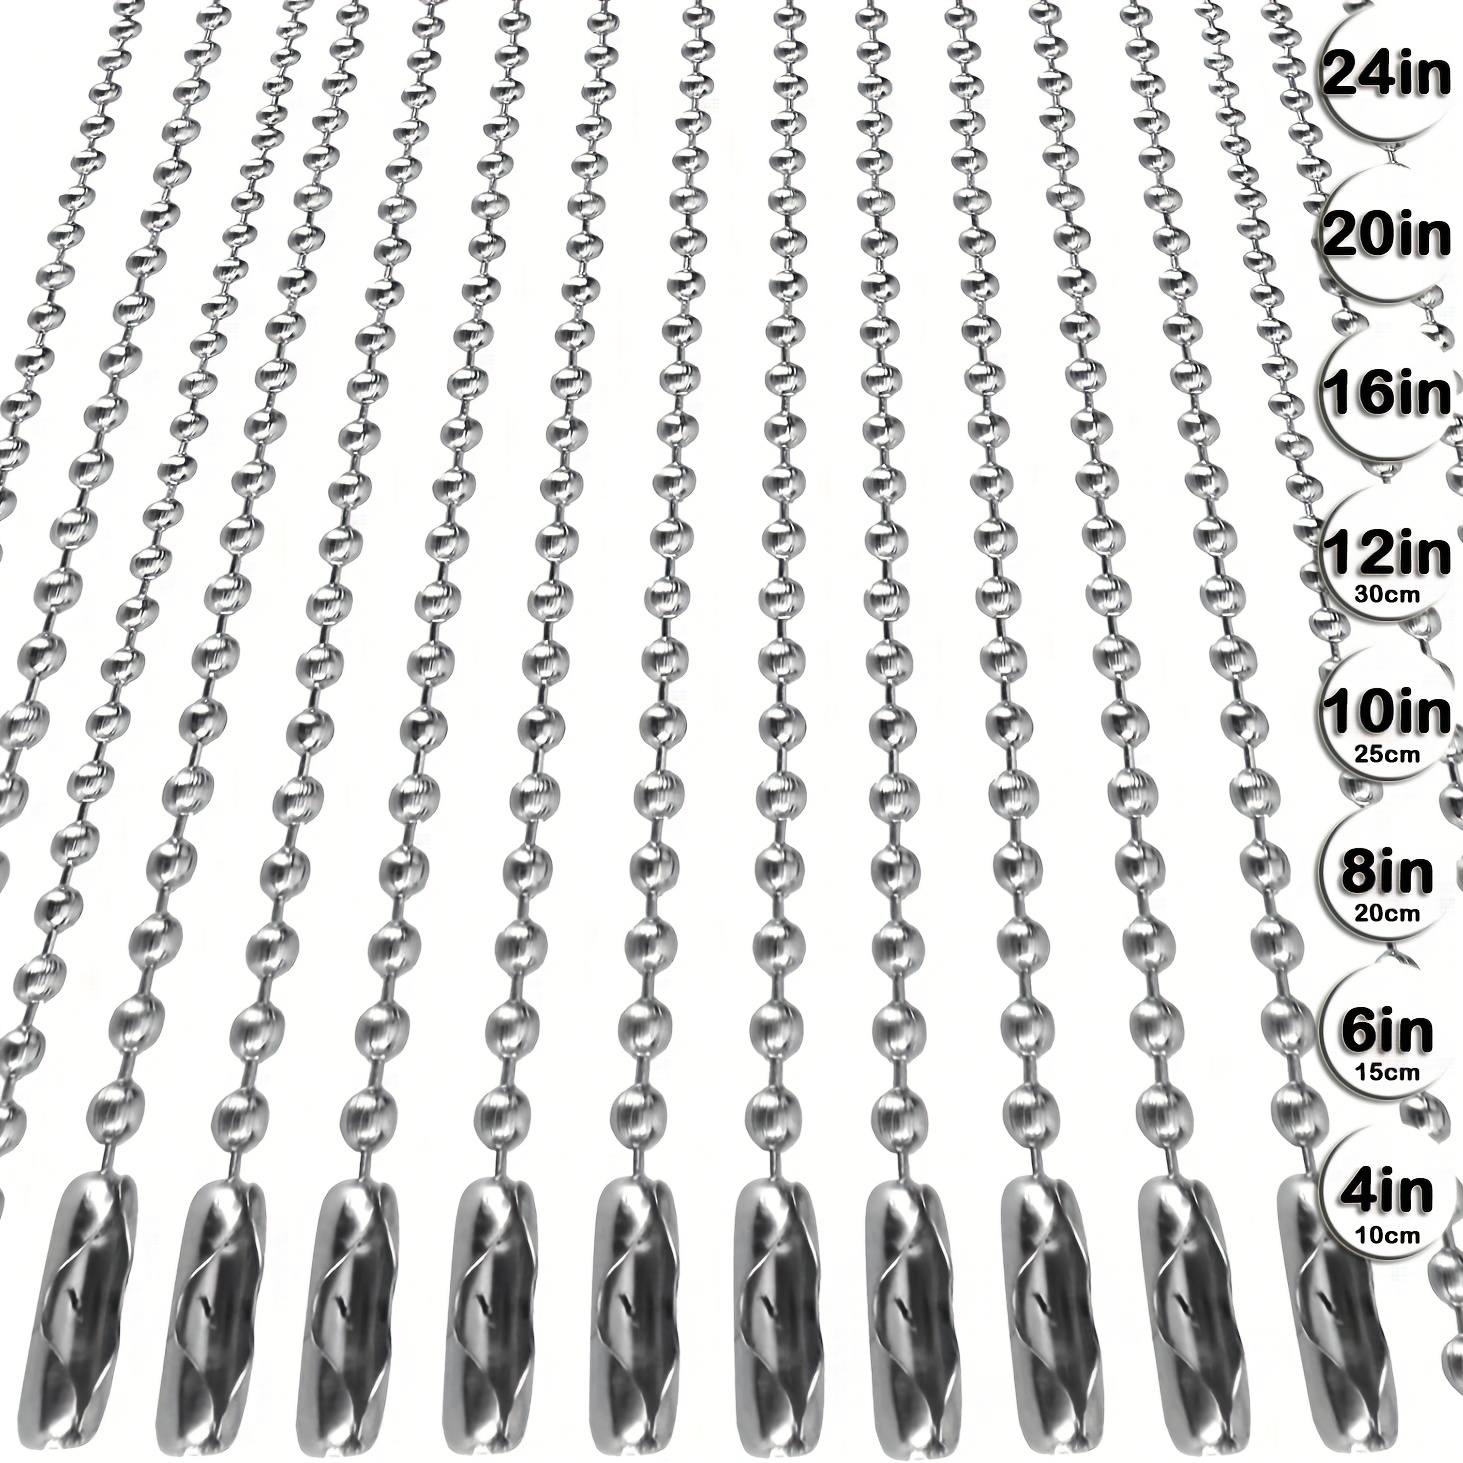 Ball Bead Chain Stainless Steel 33ft Beaded Chain Necklace Chains For  Jewelry Making Diy With 200pcs Matching 2.4mm Bead Connector Clasps